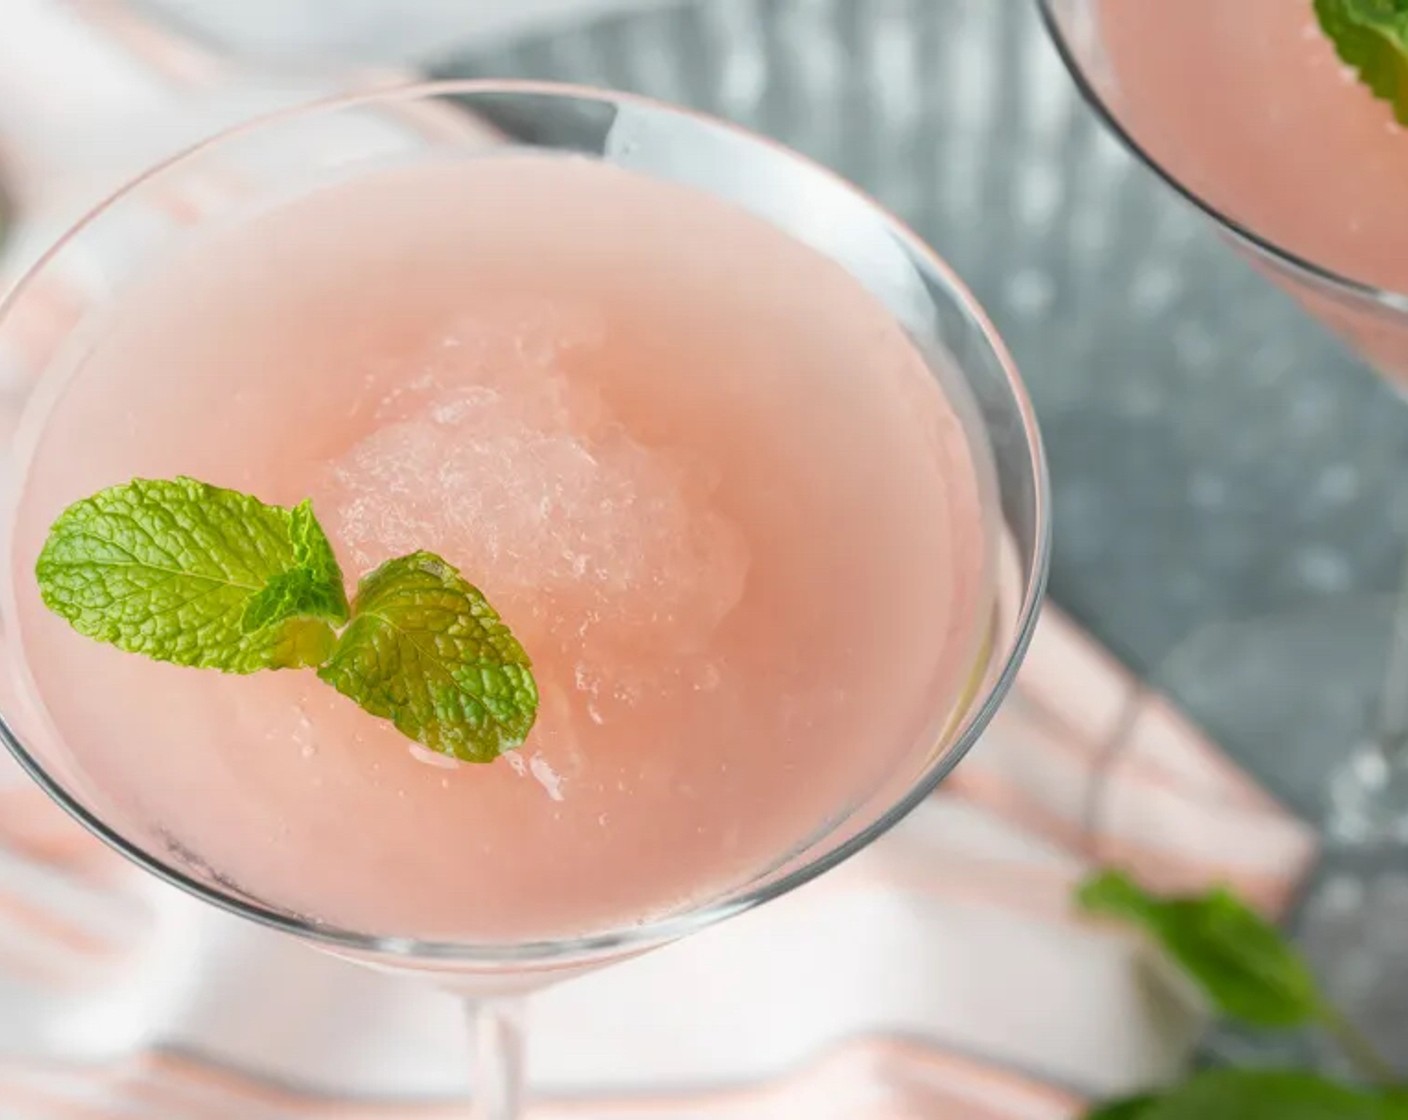 step 3 Scoop into martini glasses and garnish with Fresh Mint (to taste), if desired. Serve immediately.